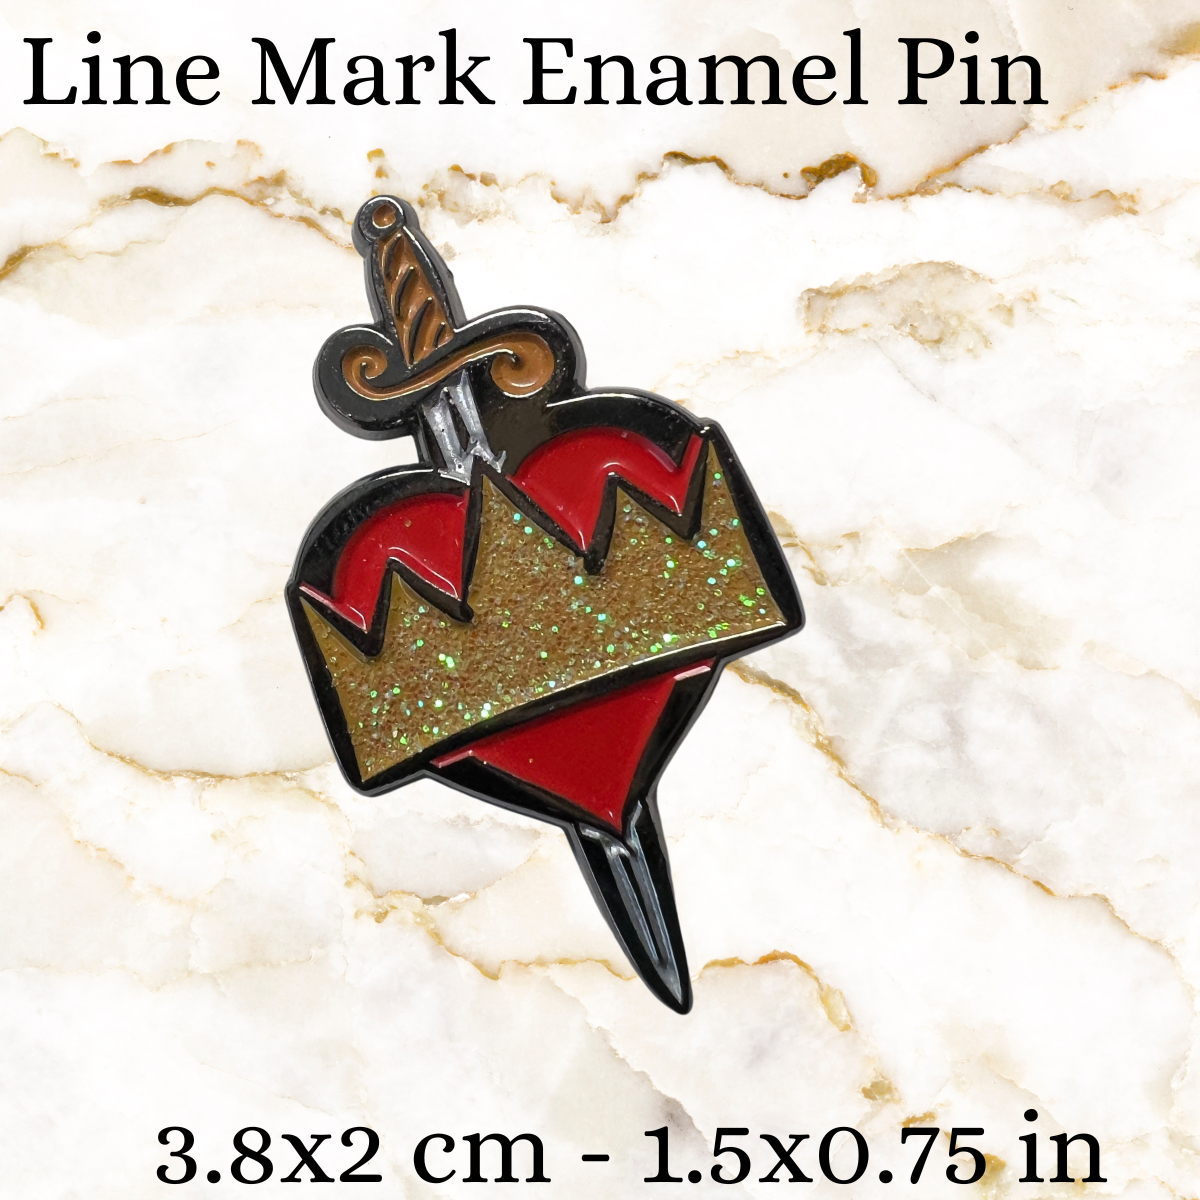 Book pin - The Head, the Heart, and the Heir logo - Gold glittery crown, in front of a red heart, in front of a silver sword, with a brown handle